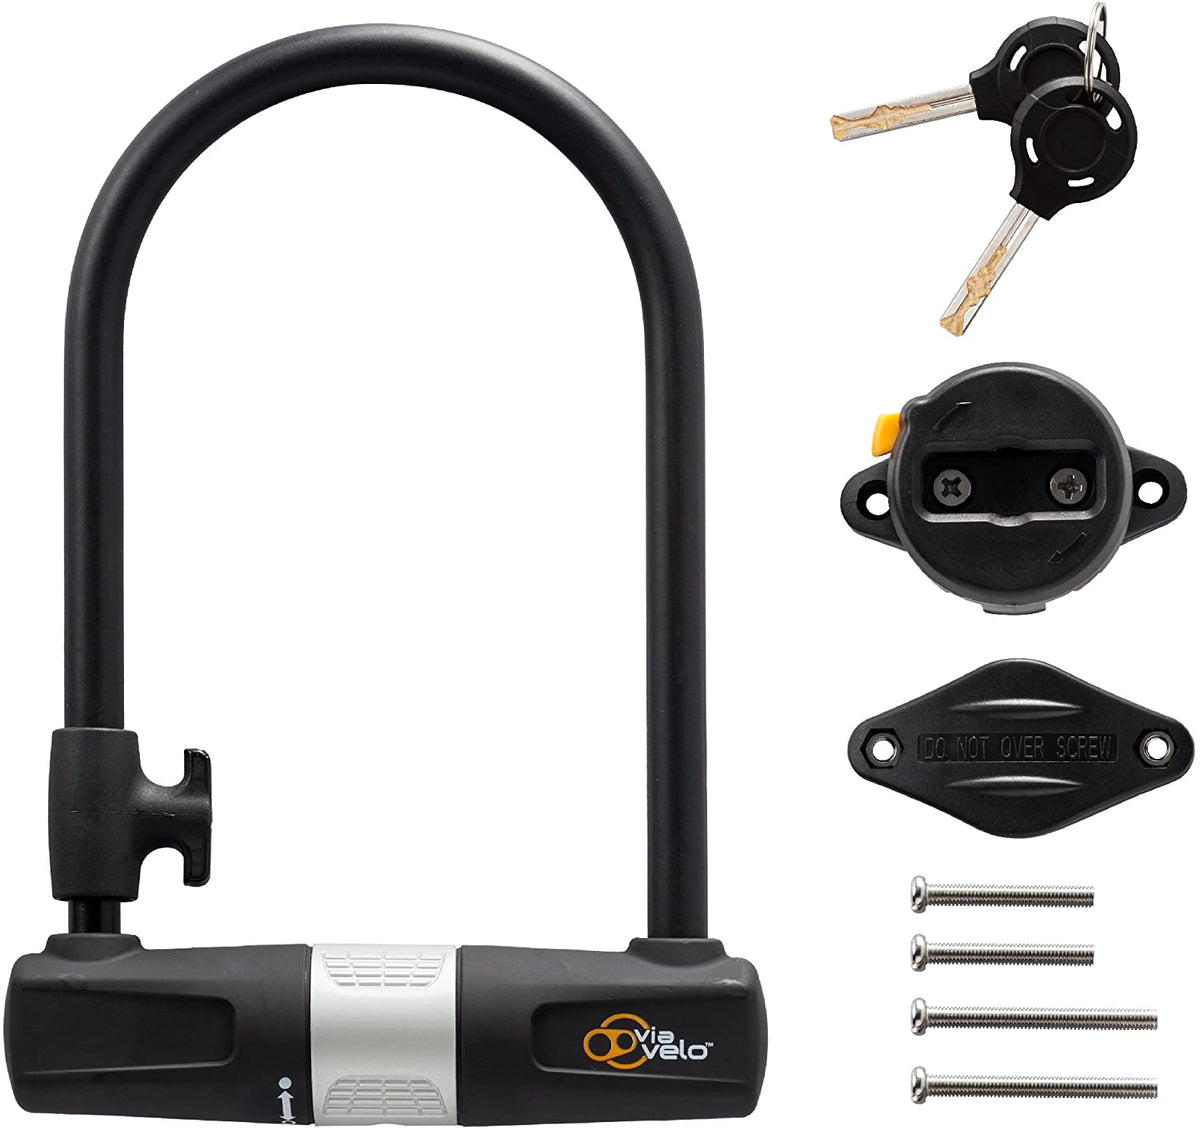 Bike Locks-Why Do You Need Them & Which One Should You Choose - ViaVelo